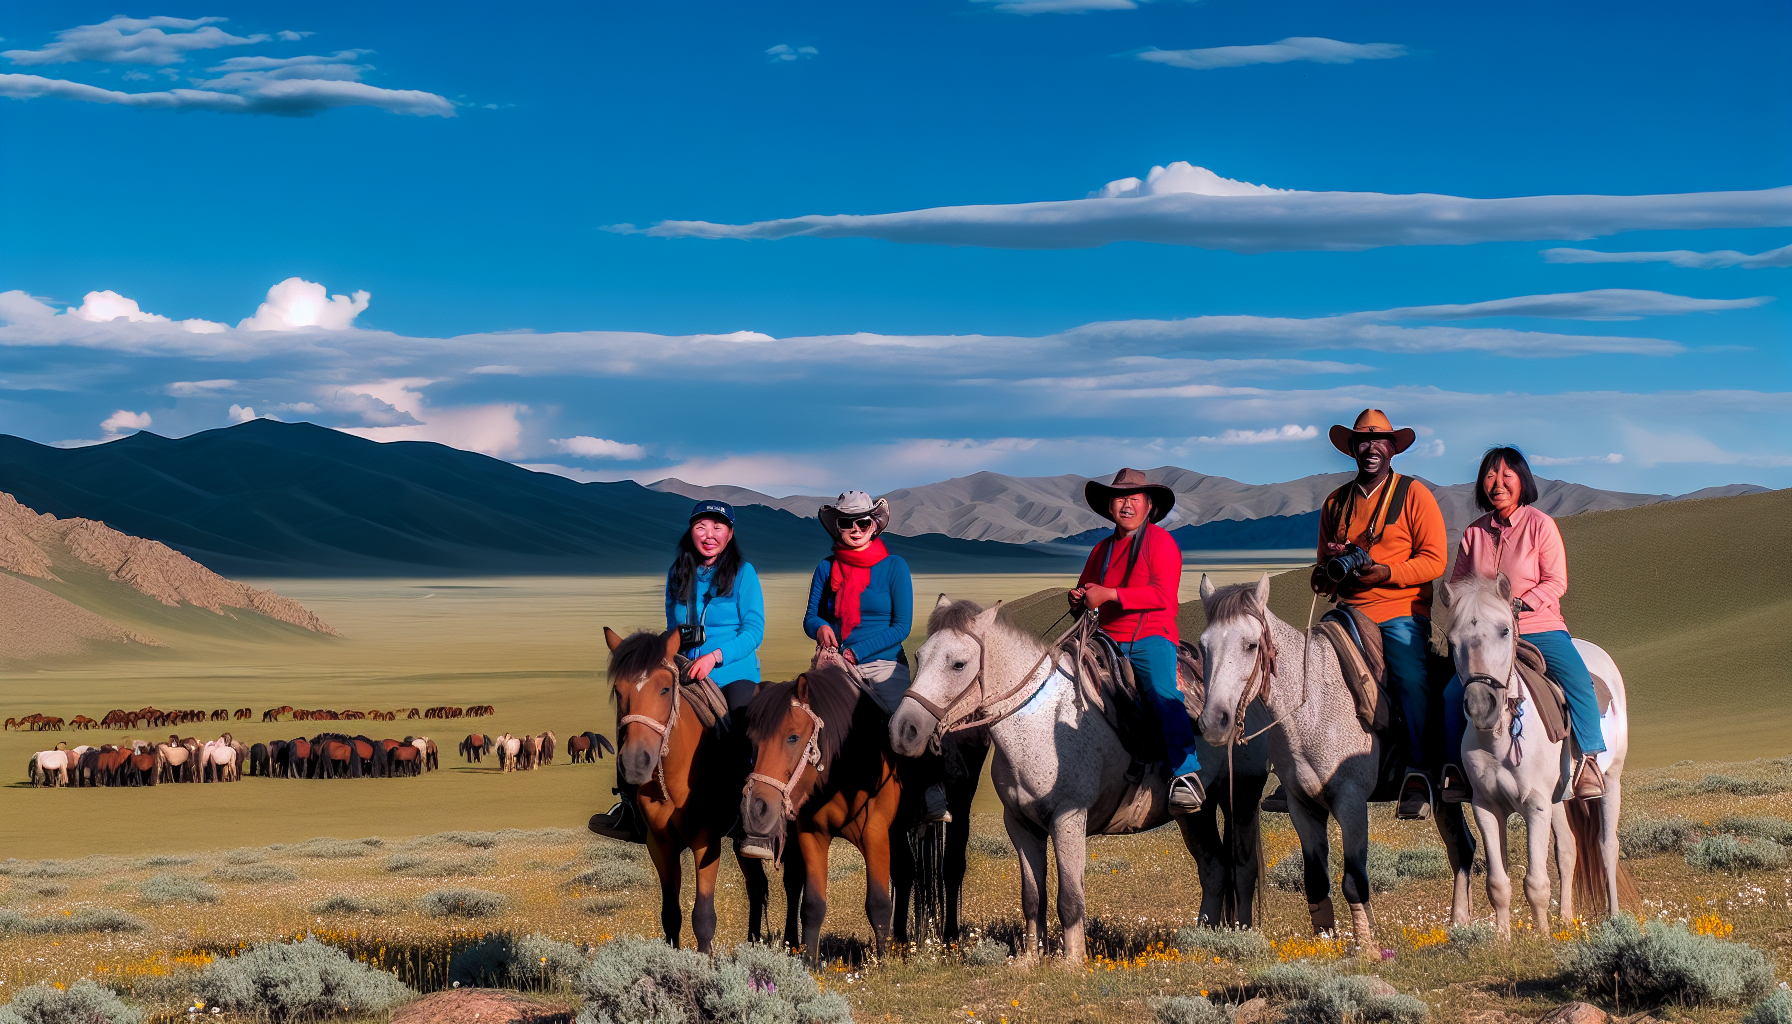 A group of travelers on horseback exploring the beautiful landscapes of Mongolia during one of the best 10 Mongolia tours.